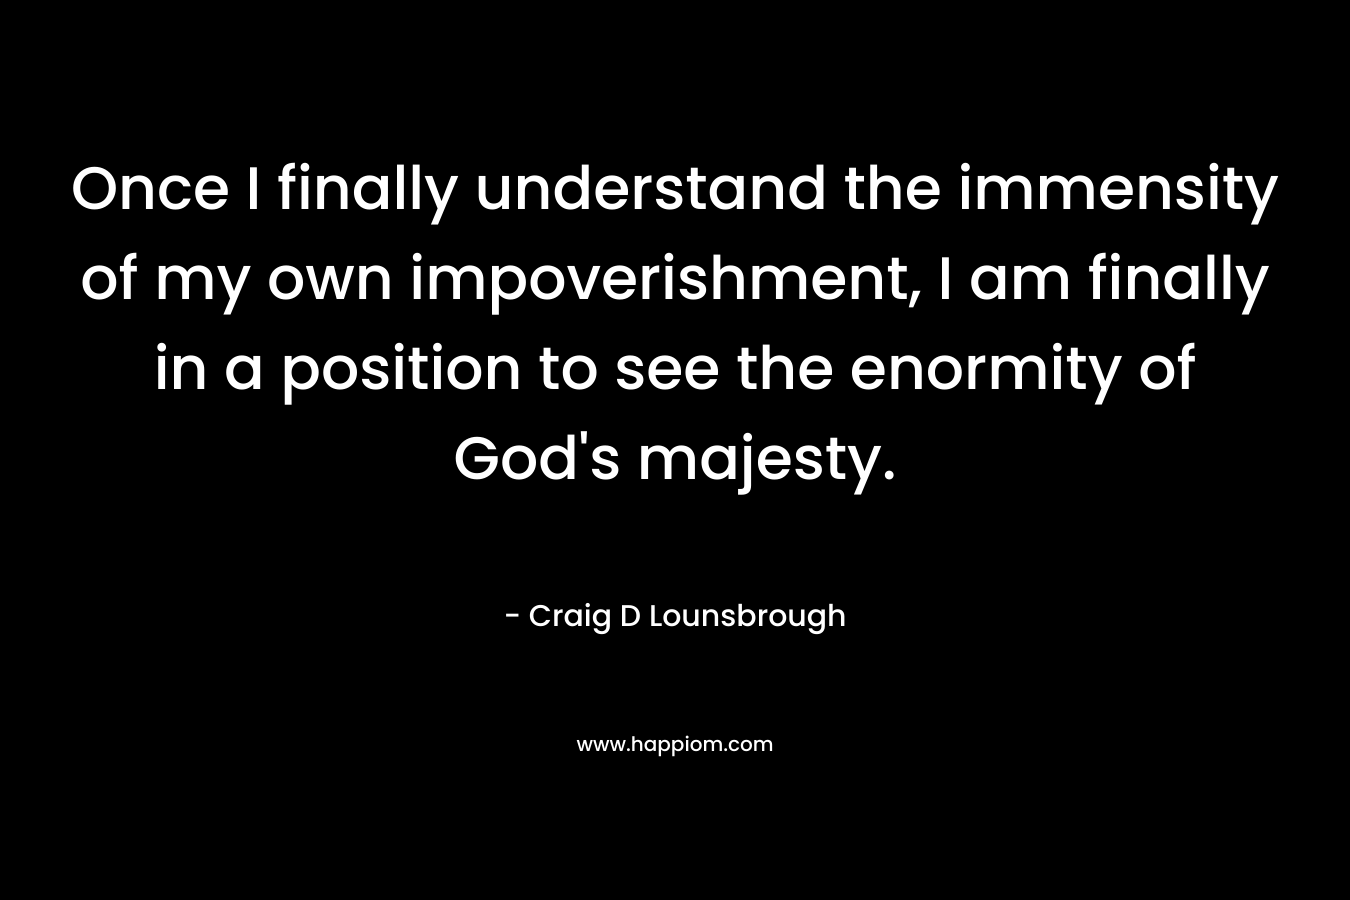 Once I finally understand the immensity of my own impoverishment, I am finally in a position to see the enormity of God's majesty.